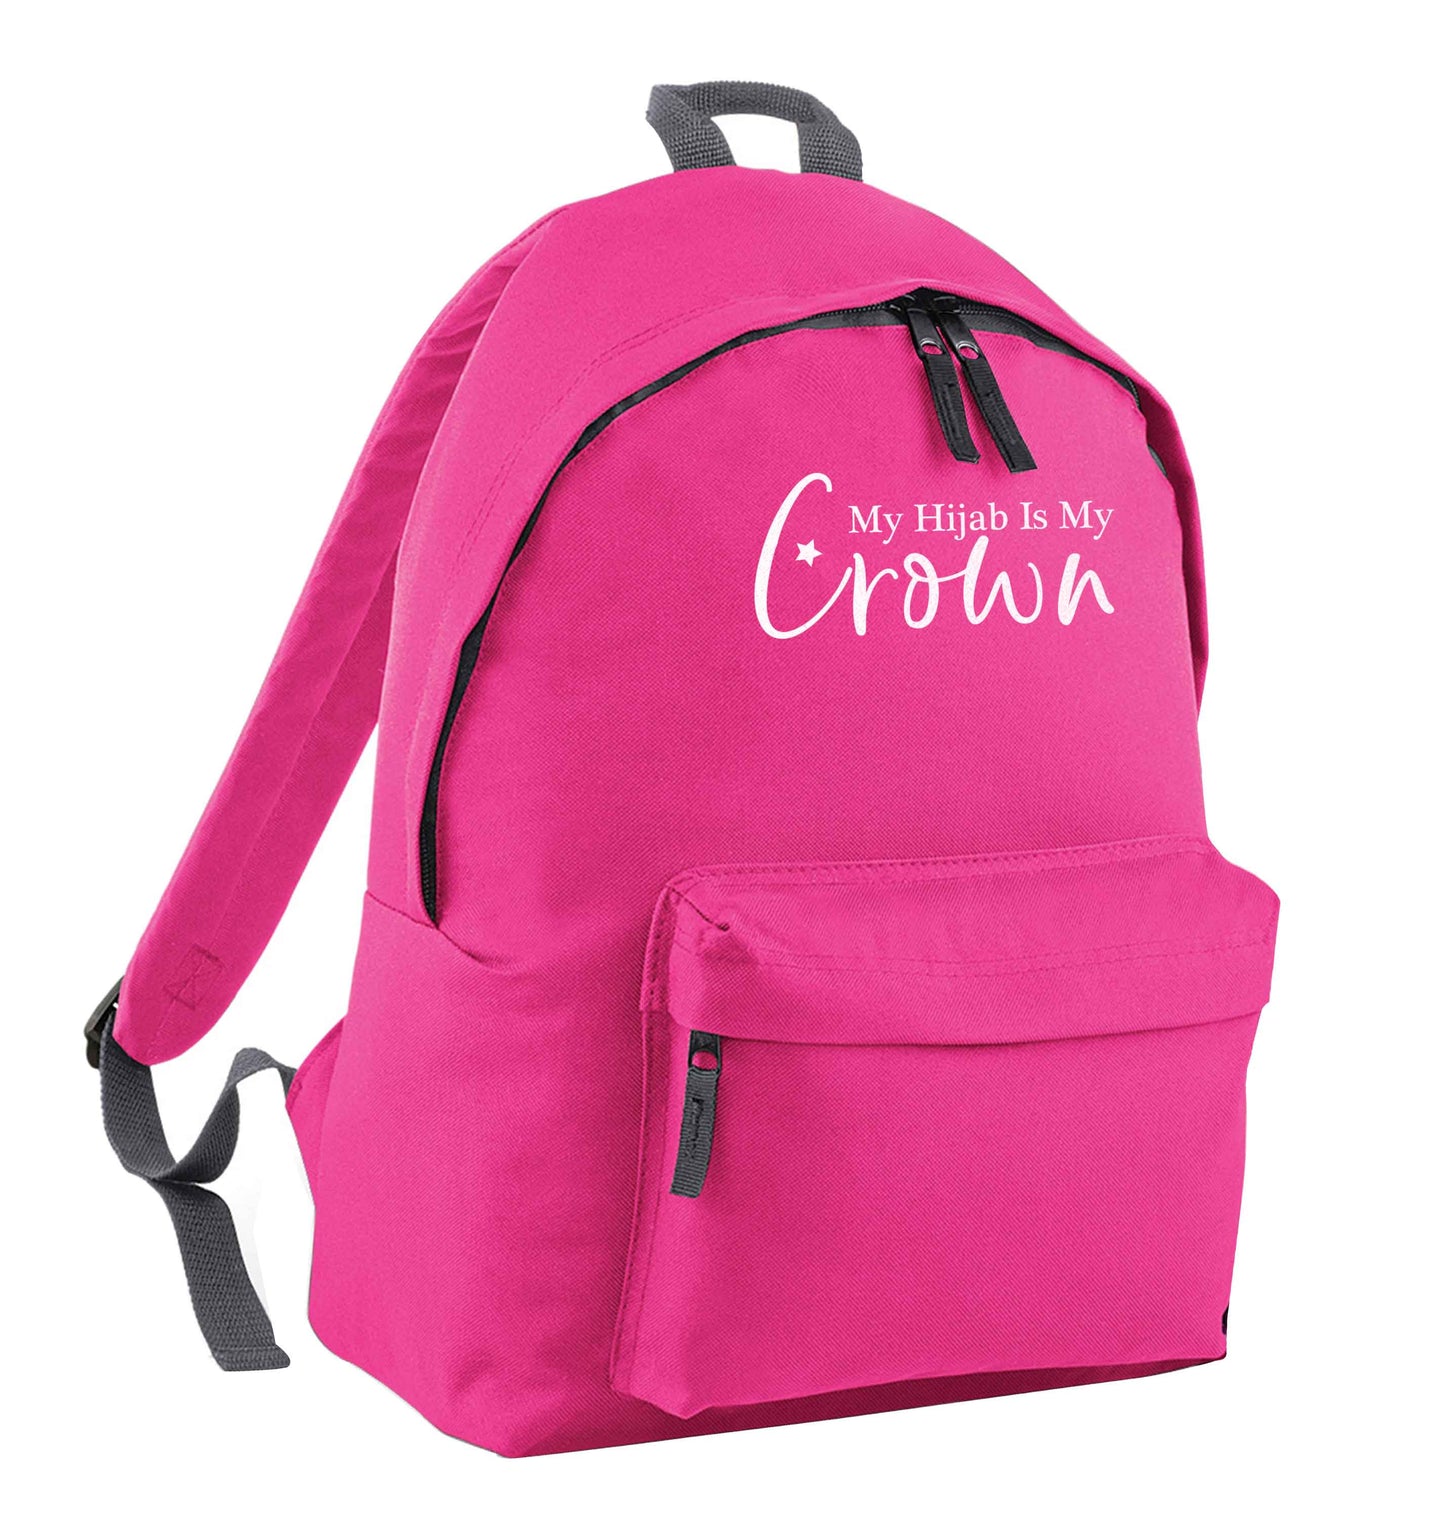 My hijab is my crown pink children's backpack